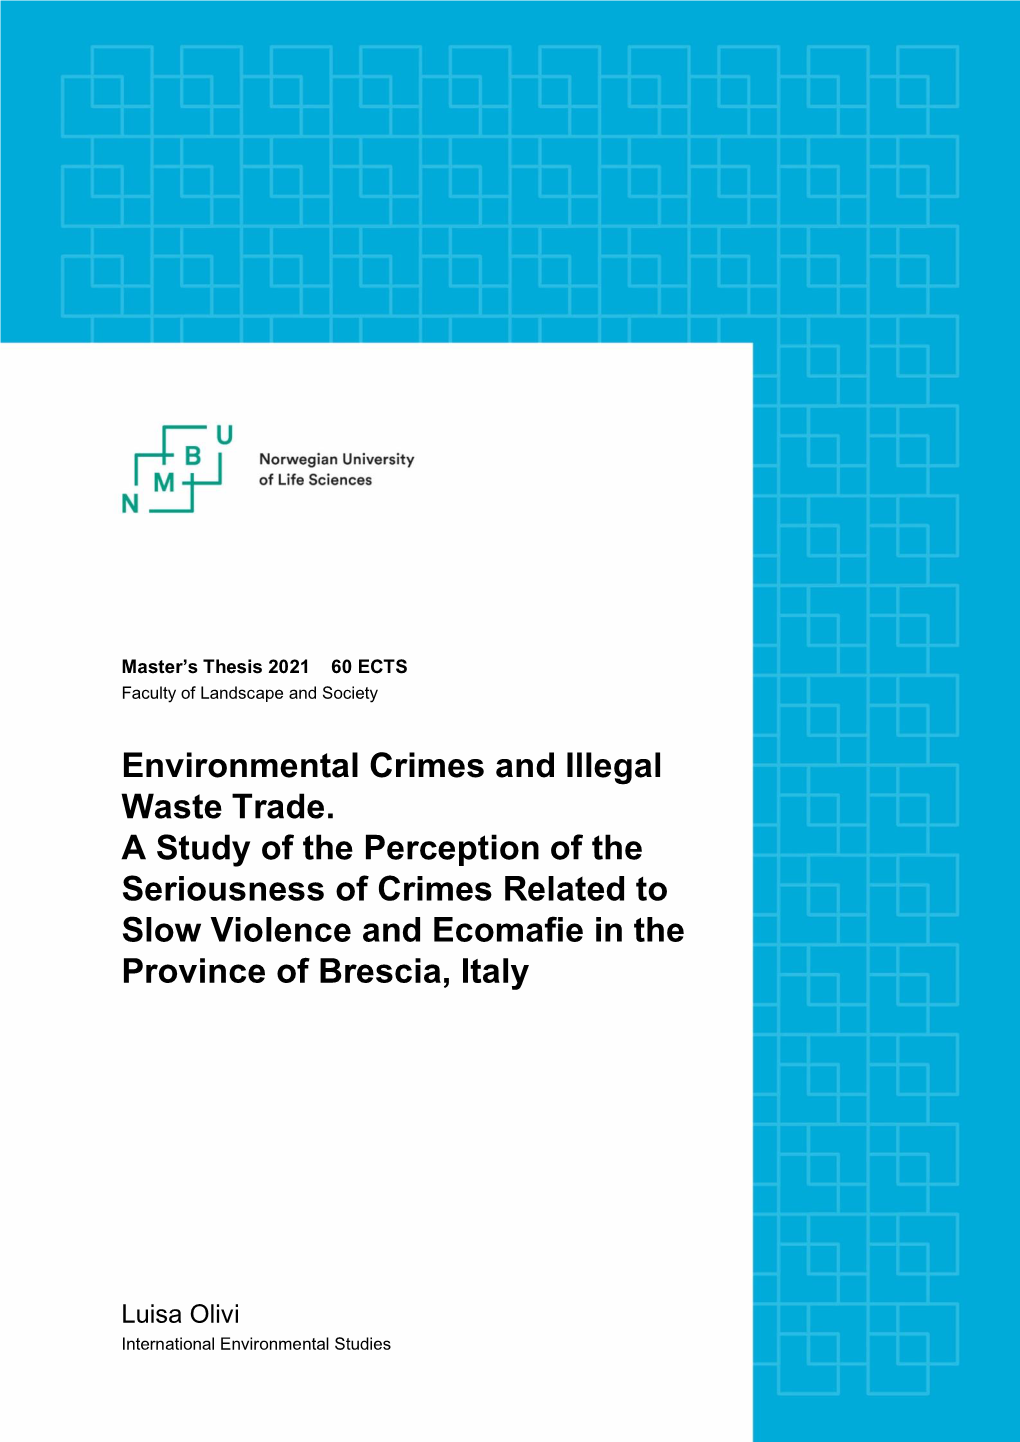 Environmental Crimes and Illegal Waste Trade. a Study of The